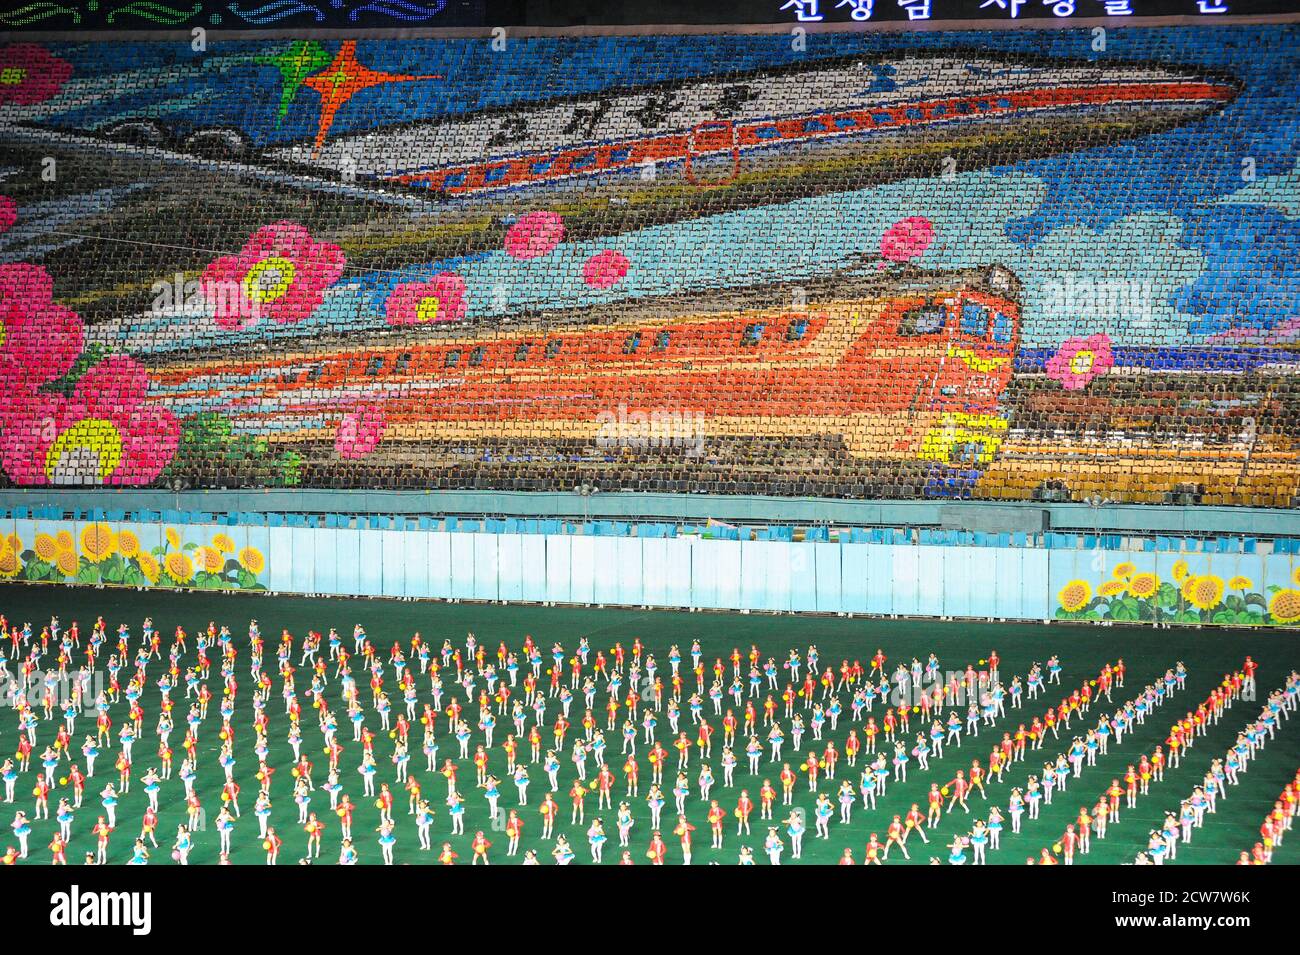 08.08.2012, Pyongyang, North Korea - Giant mosaics and artistic performance with acrobats, dancers and gymnasts during Arirang Festival Mass Games. Stock Photo